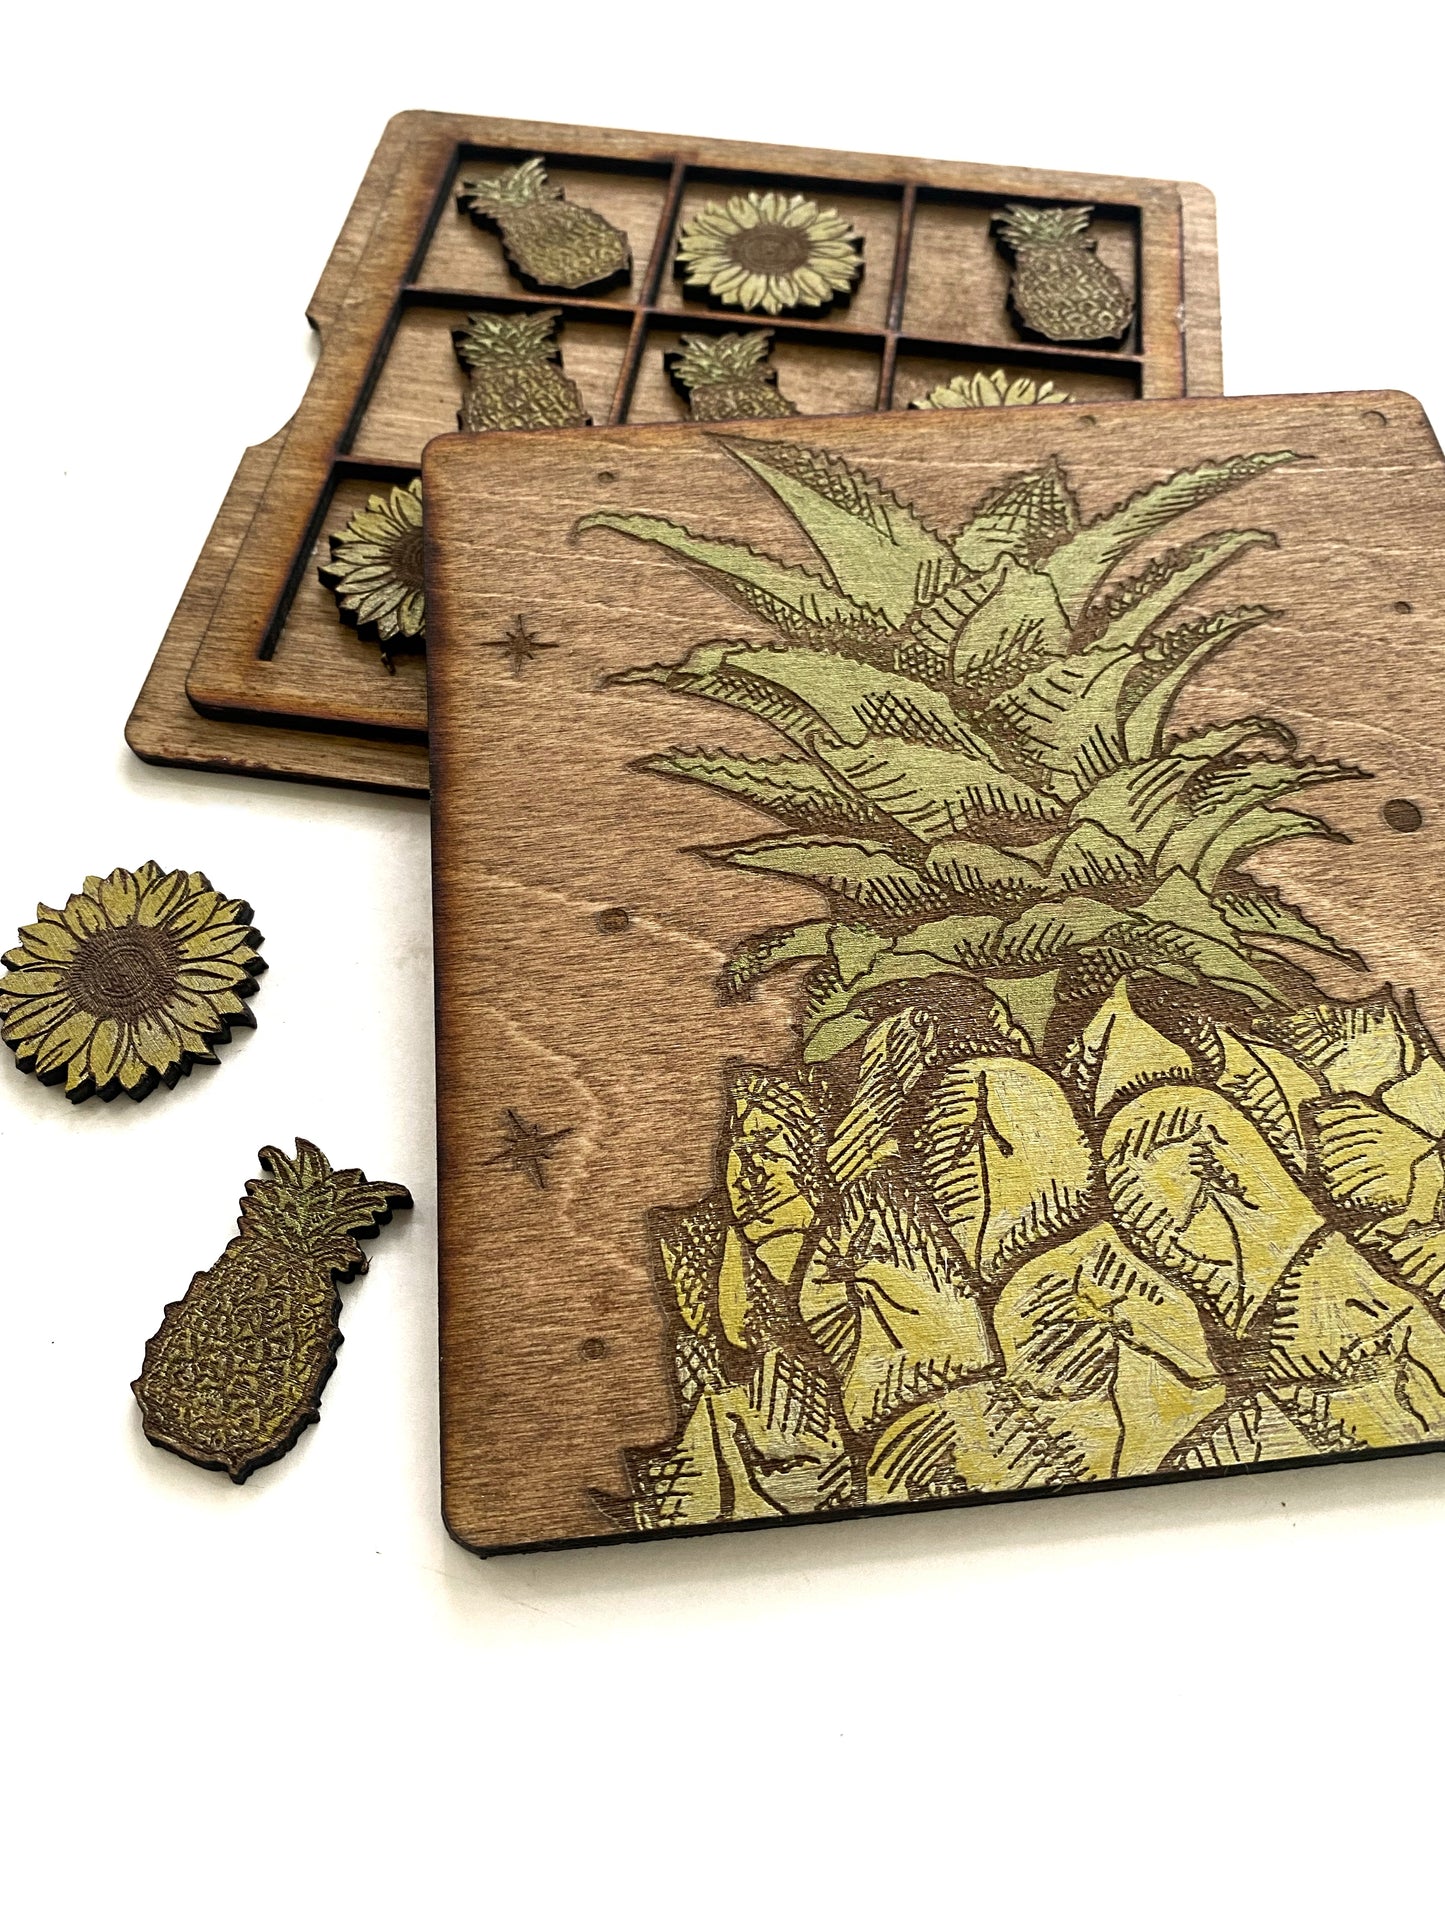 Tic Tac Toe Game - Pineapples and Sunflowers